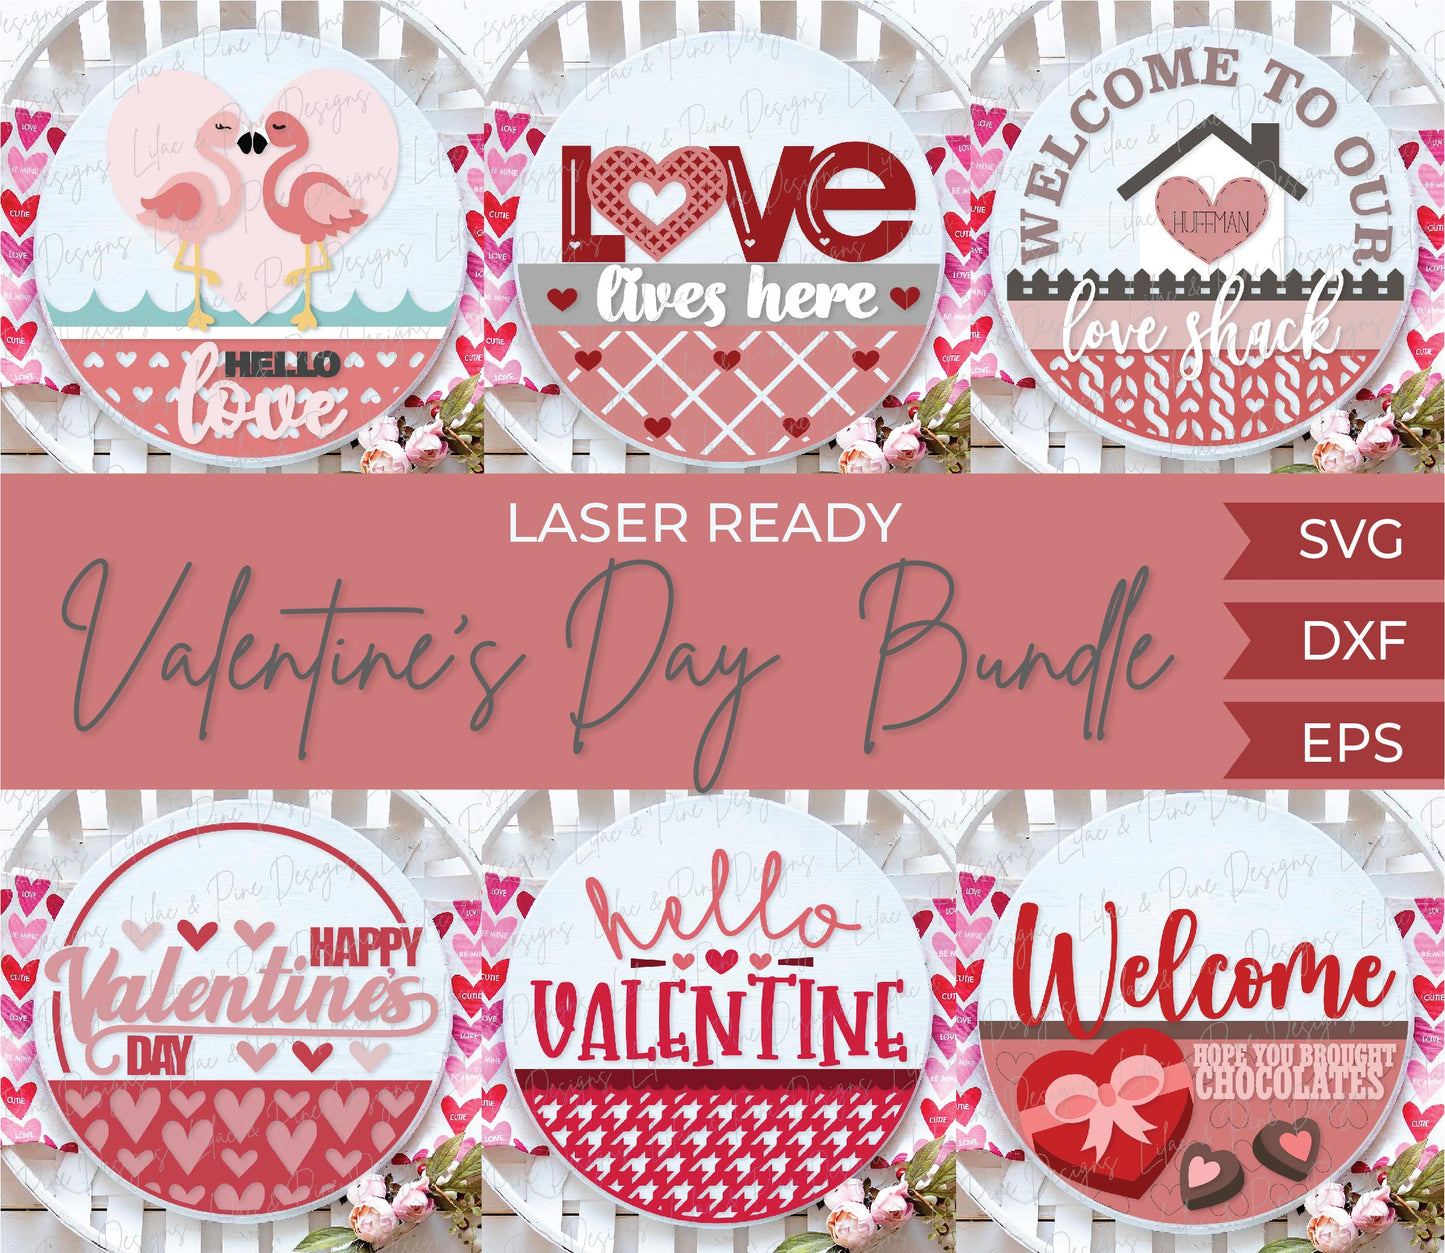 Love and Luck Bundle Volume 1